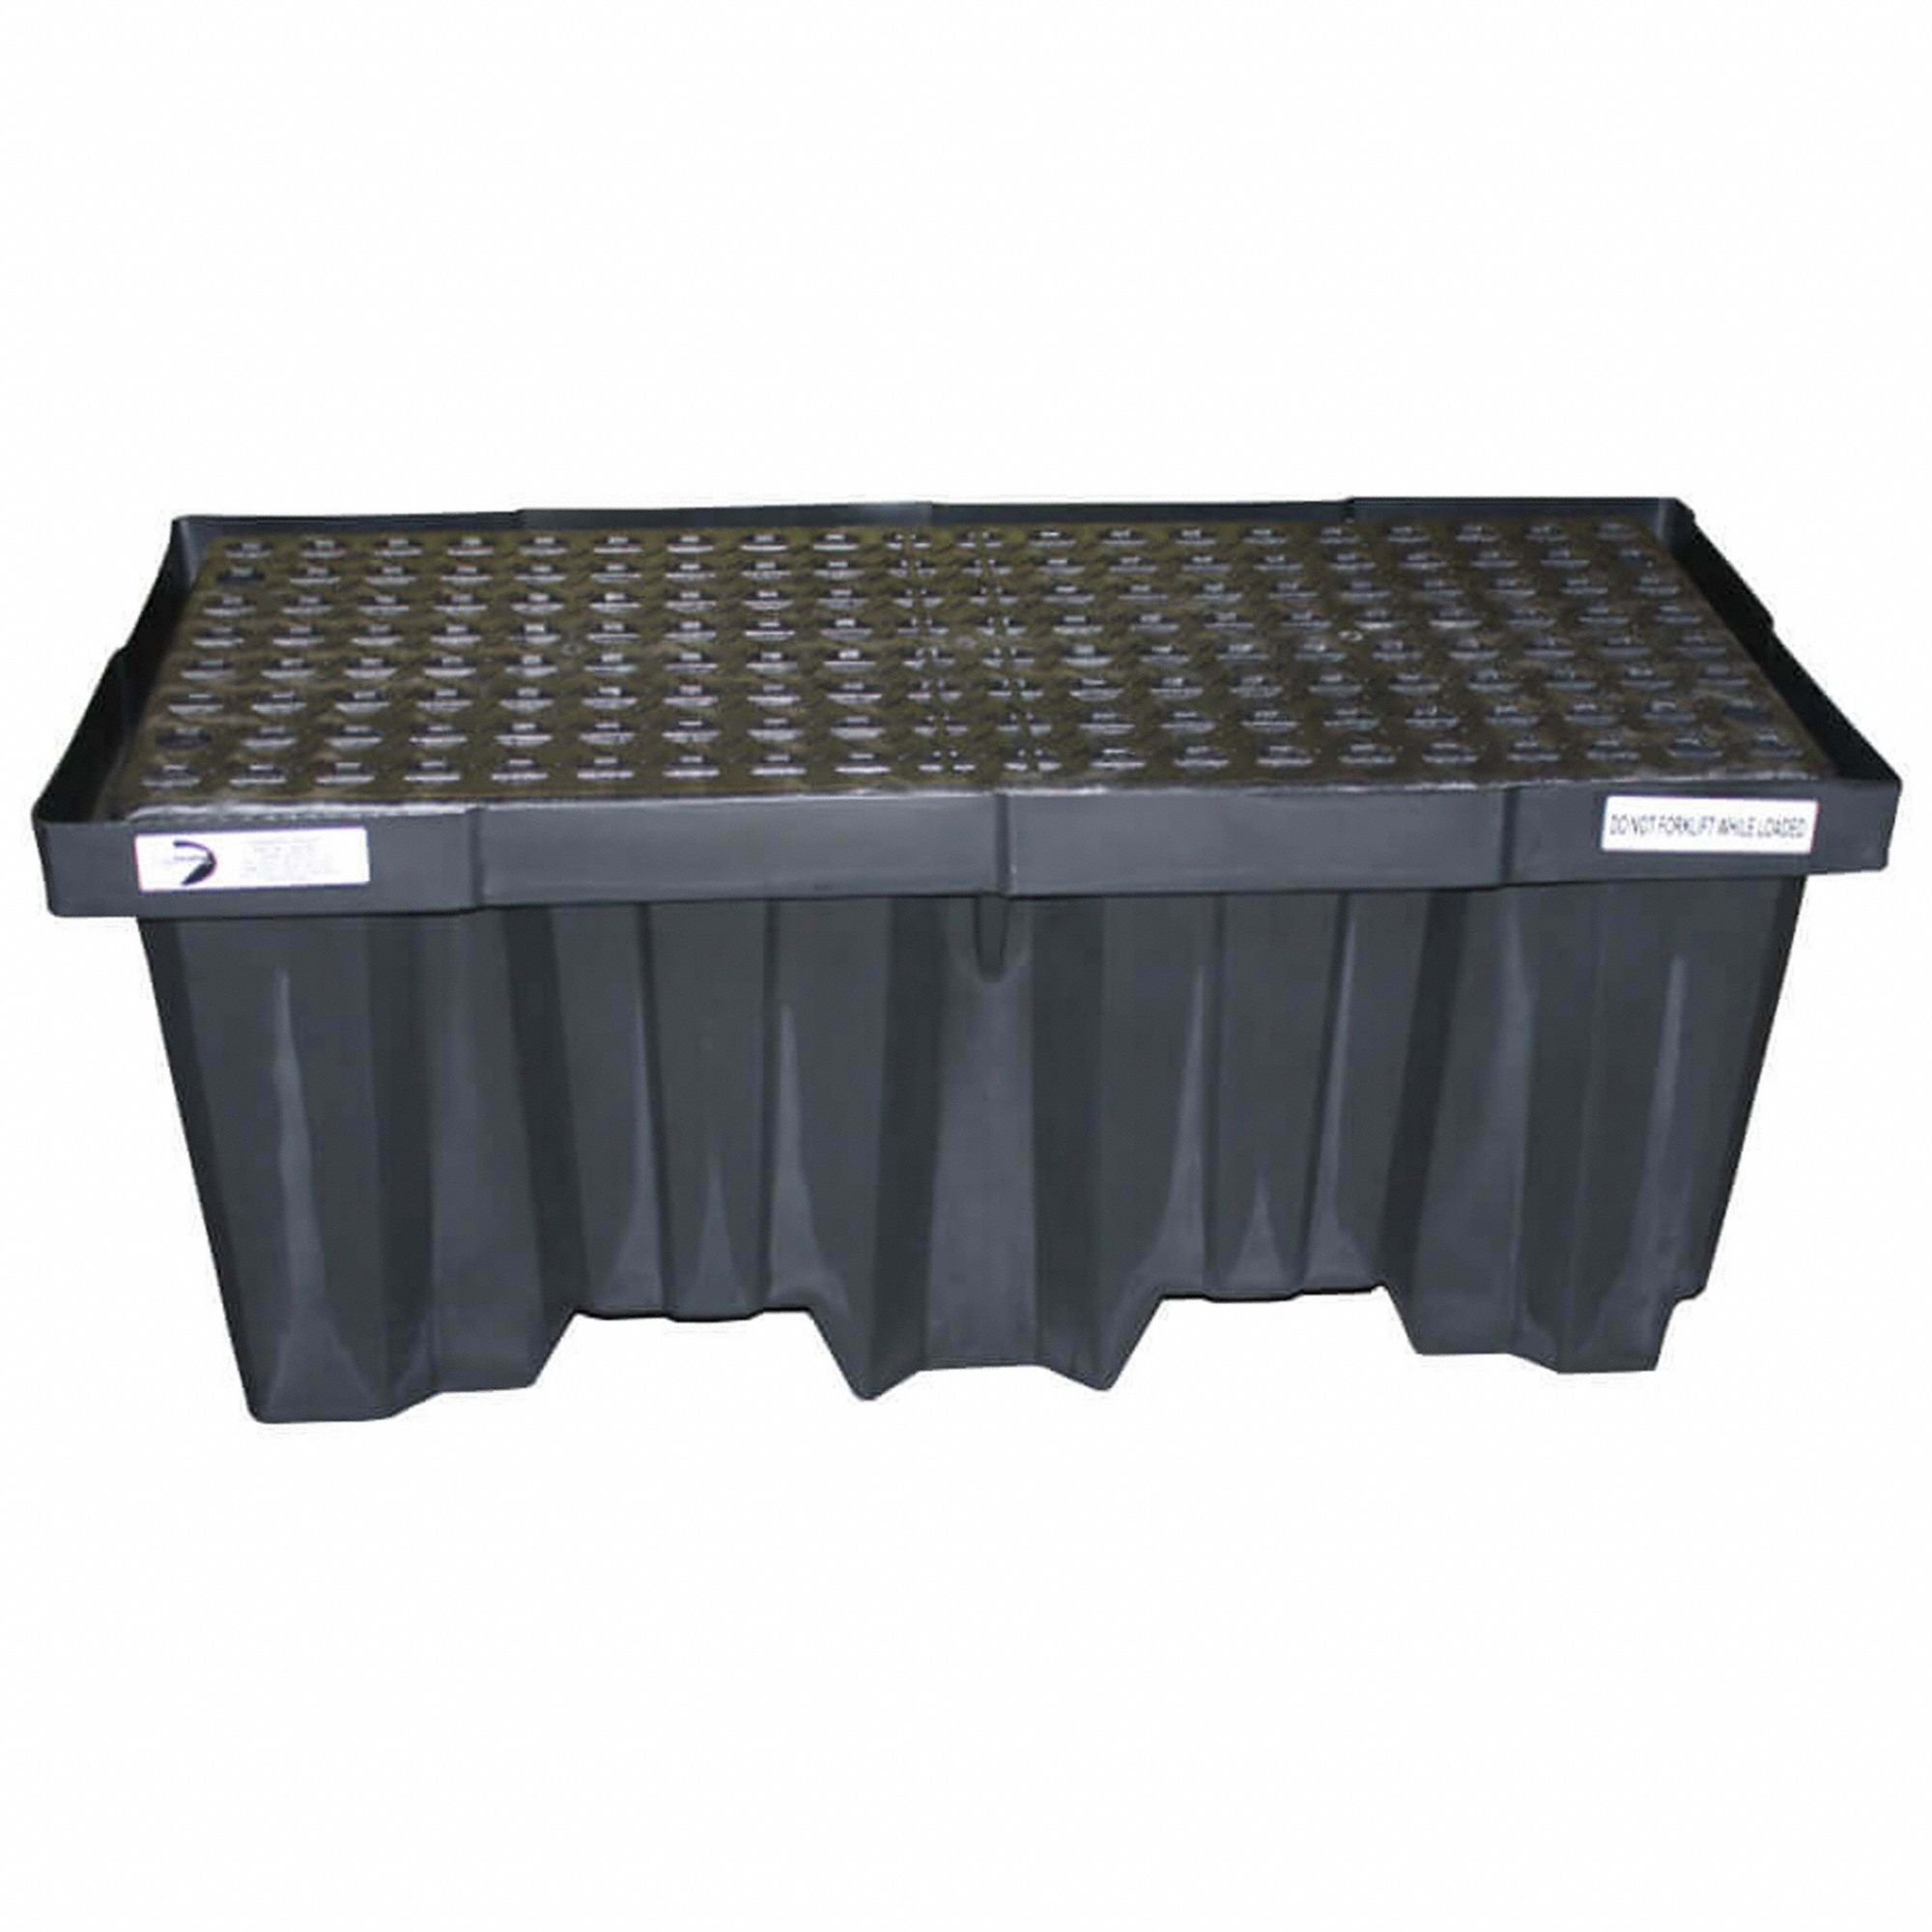 Drum Spill Containment Pallet: For 2 Drums, 66 gal Spill Capacity, Black